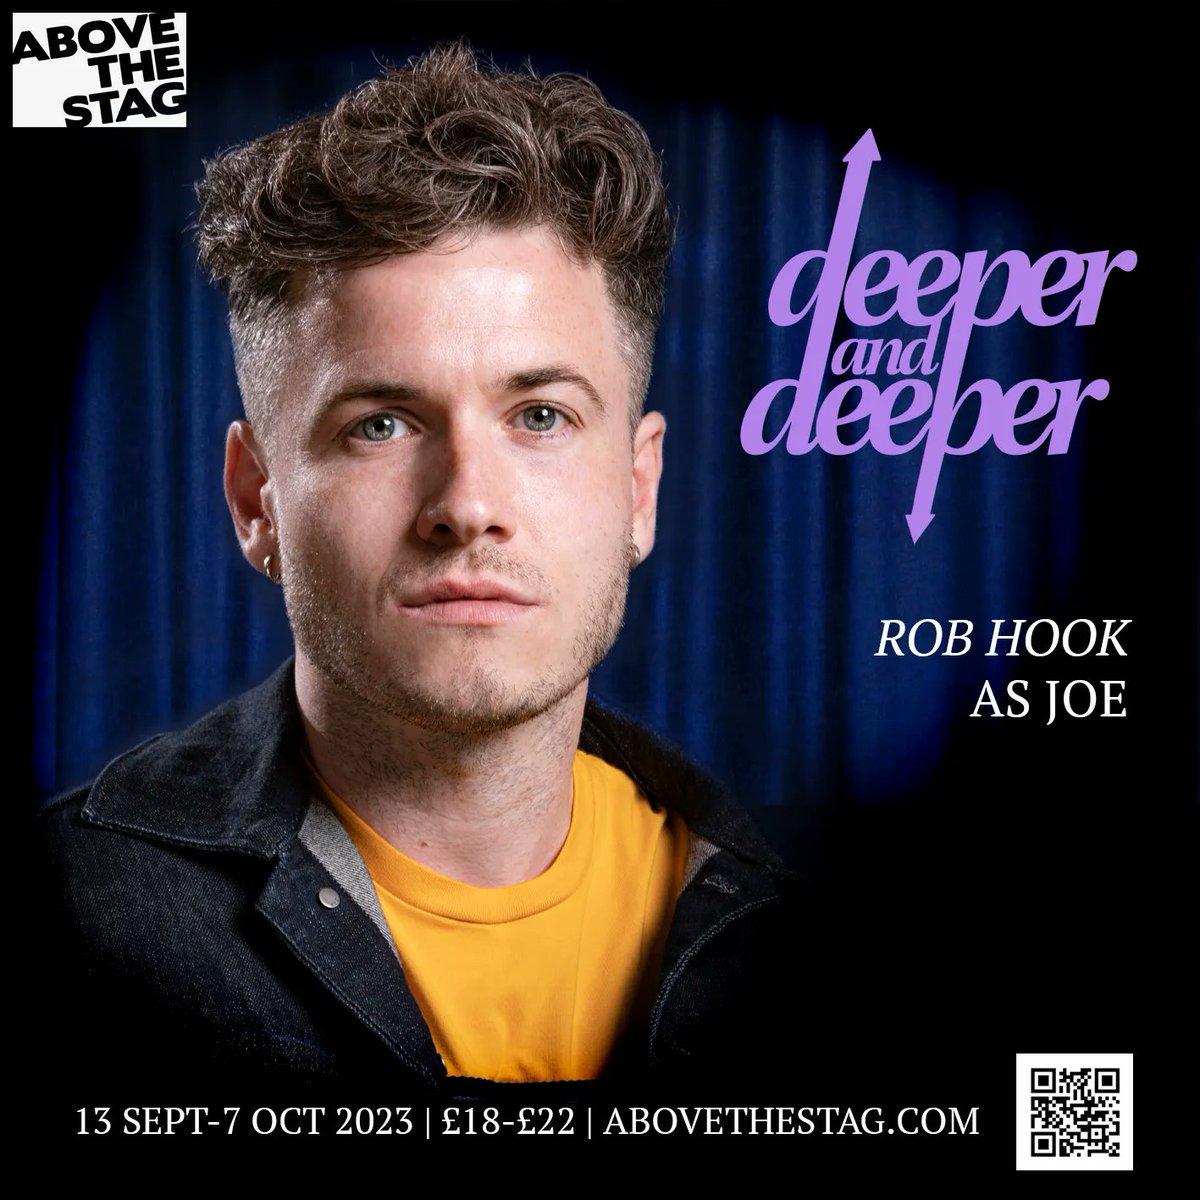 Returning to the role of Joe in Deeper and Deeper is Robert Hook @abovethestag.com book now seats selling fast!